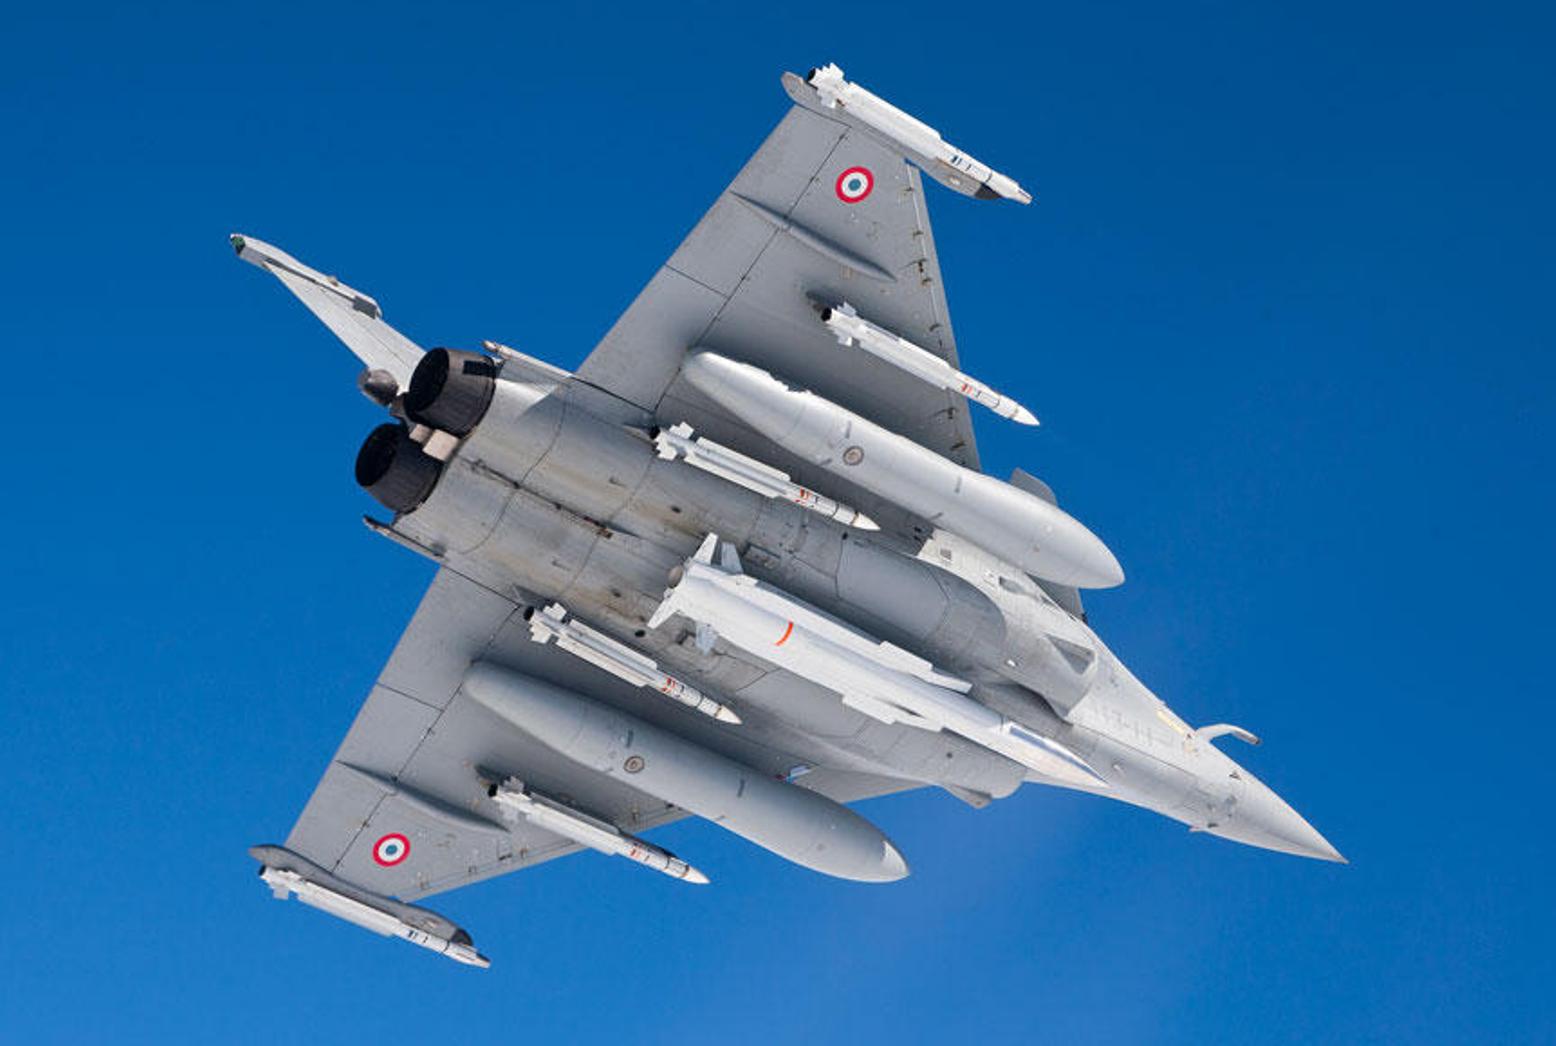 Air-Sol+Moyenne+Port%C3%A9e-Am%C3%A9lior%C3%A9+(ASMP-A)++French+air-launched+nuclear+missile+Dassault+Rafale+French+twin-engine+delta-wing+fighter+aircraft+(1).jpg